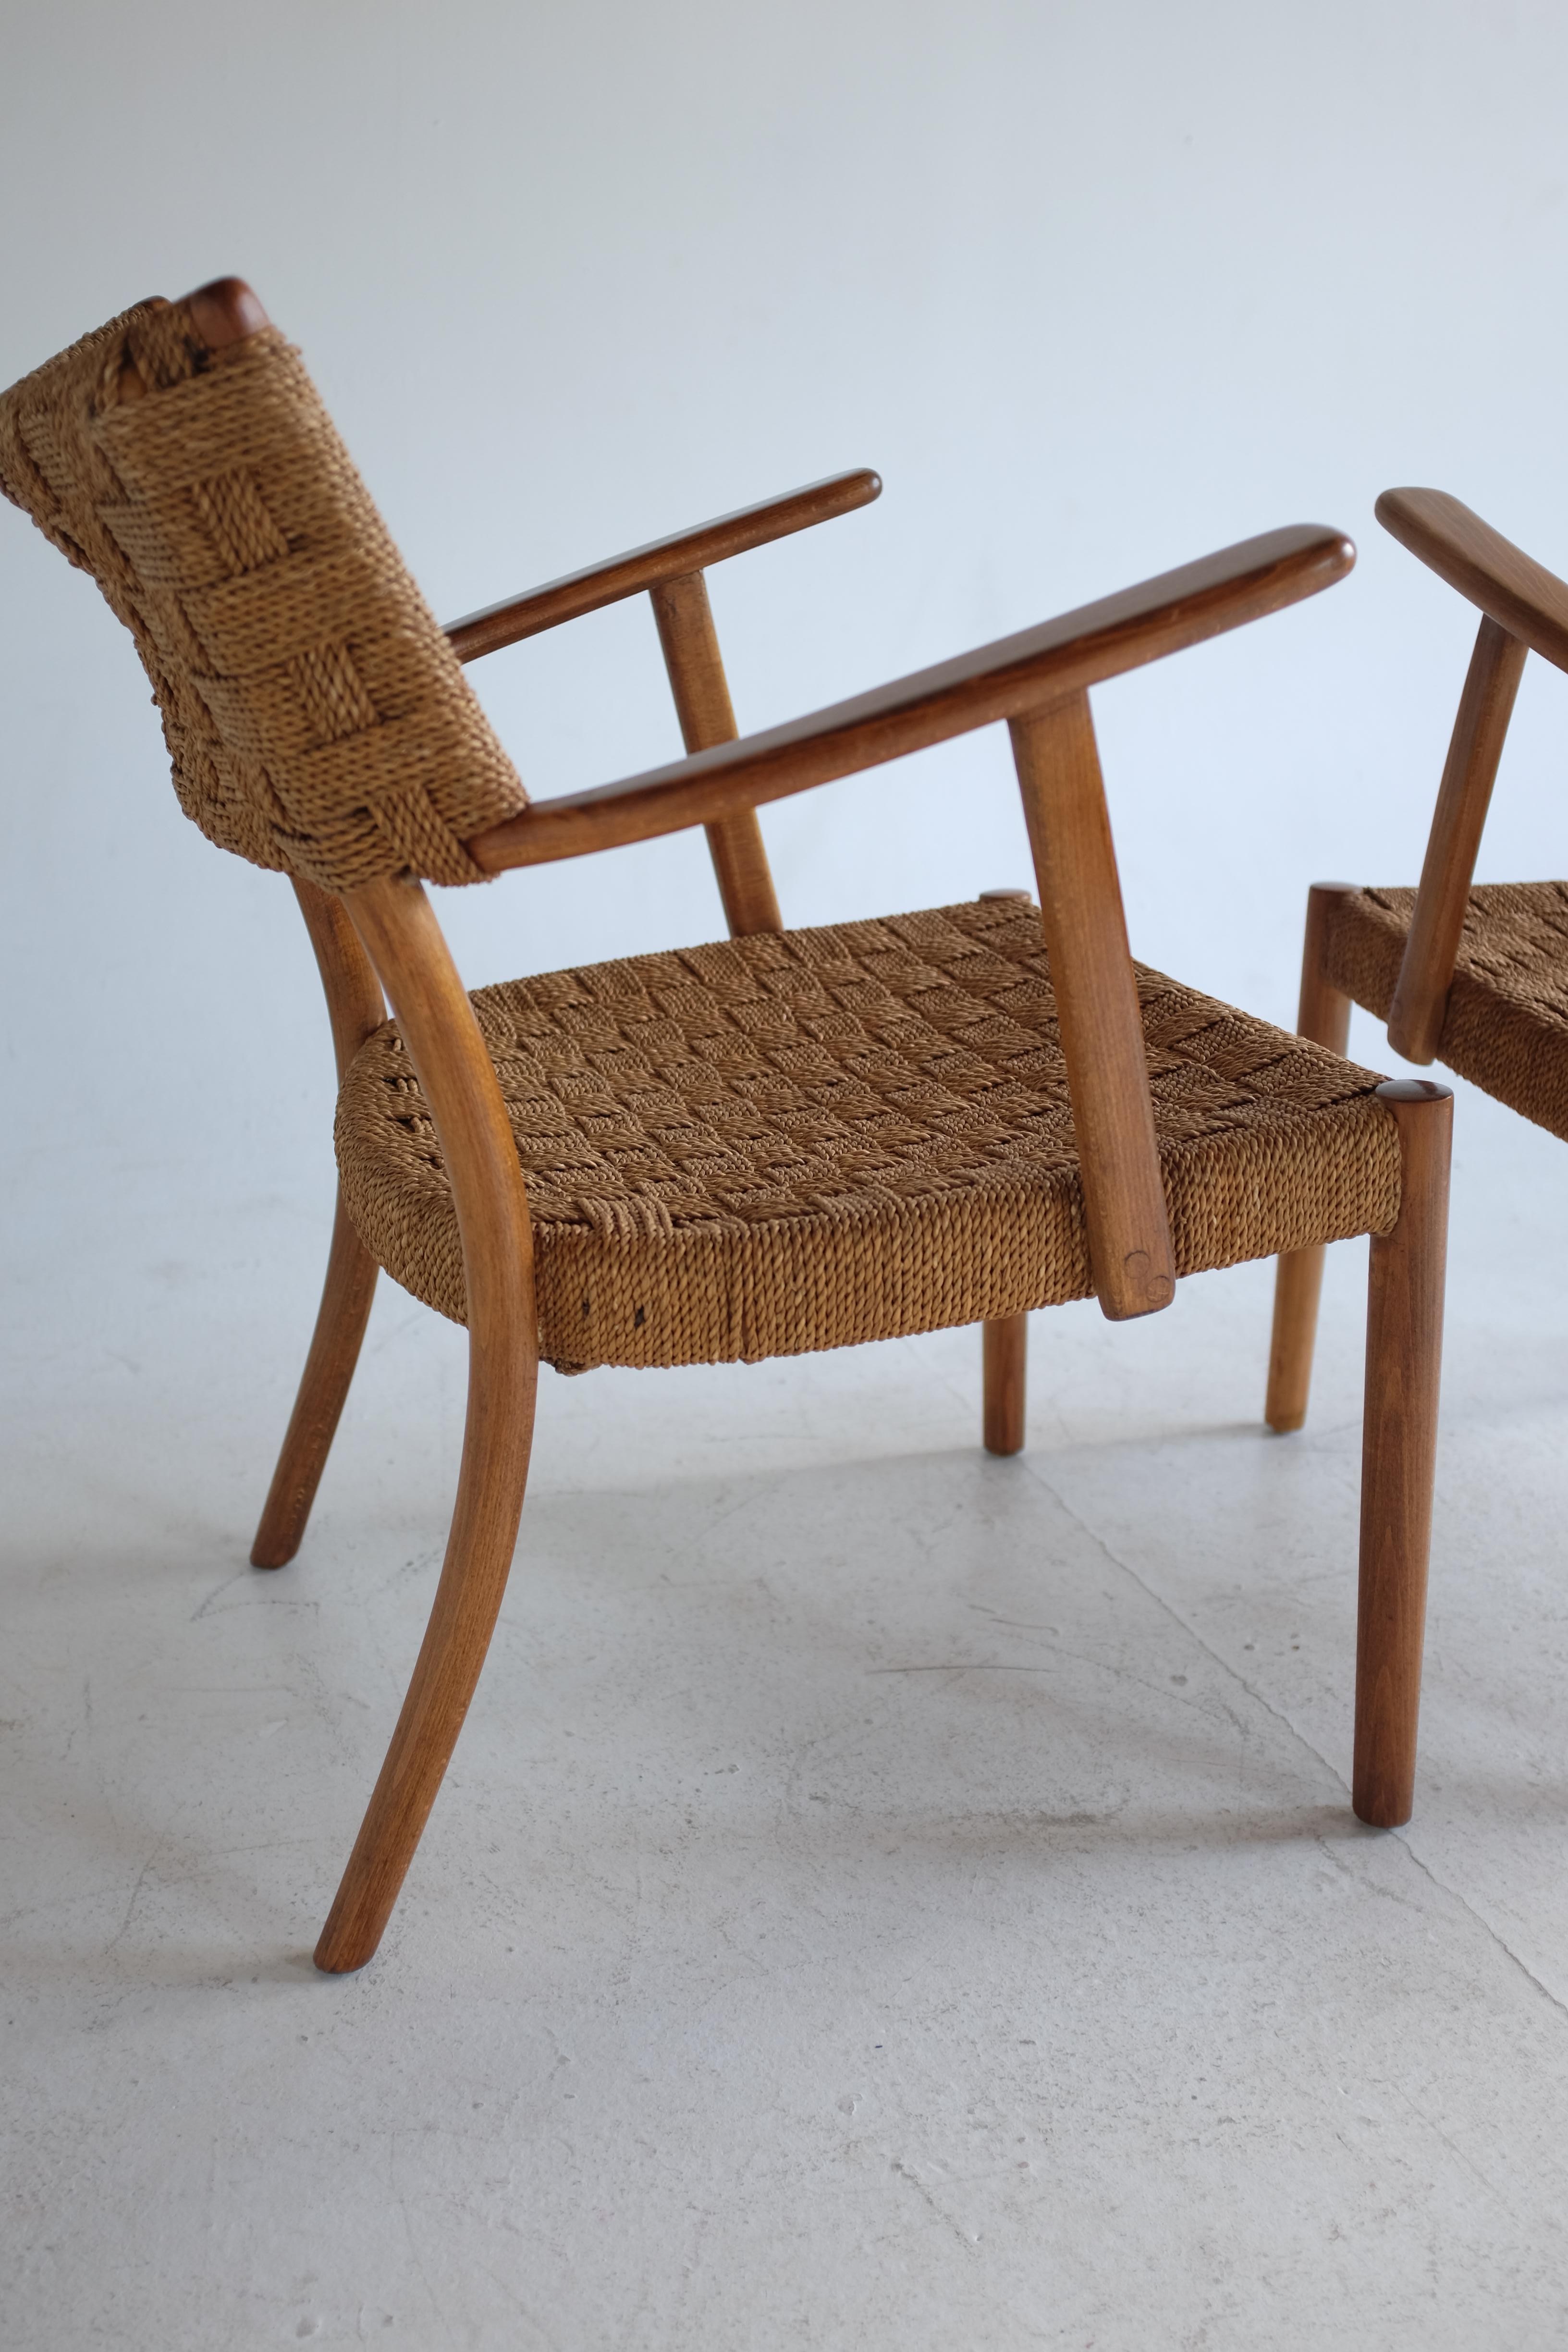 Pair of 1930's Rope chair by Karl Schrøder For Sale 3